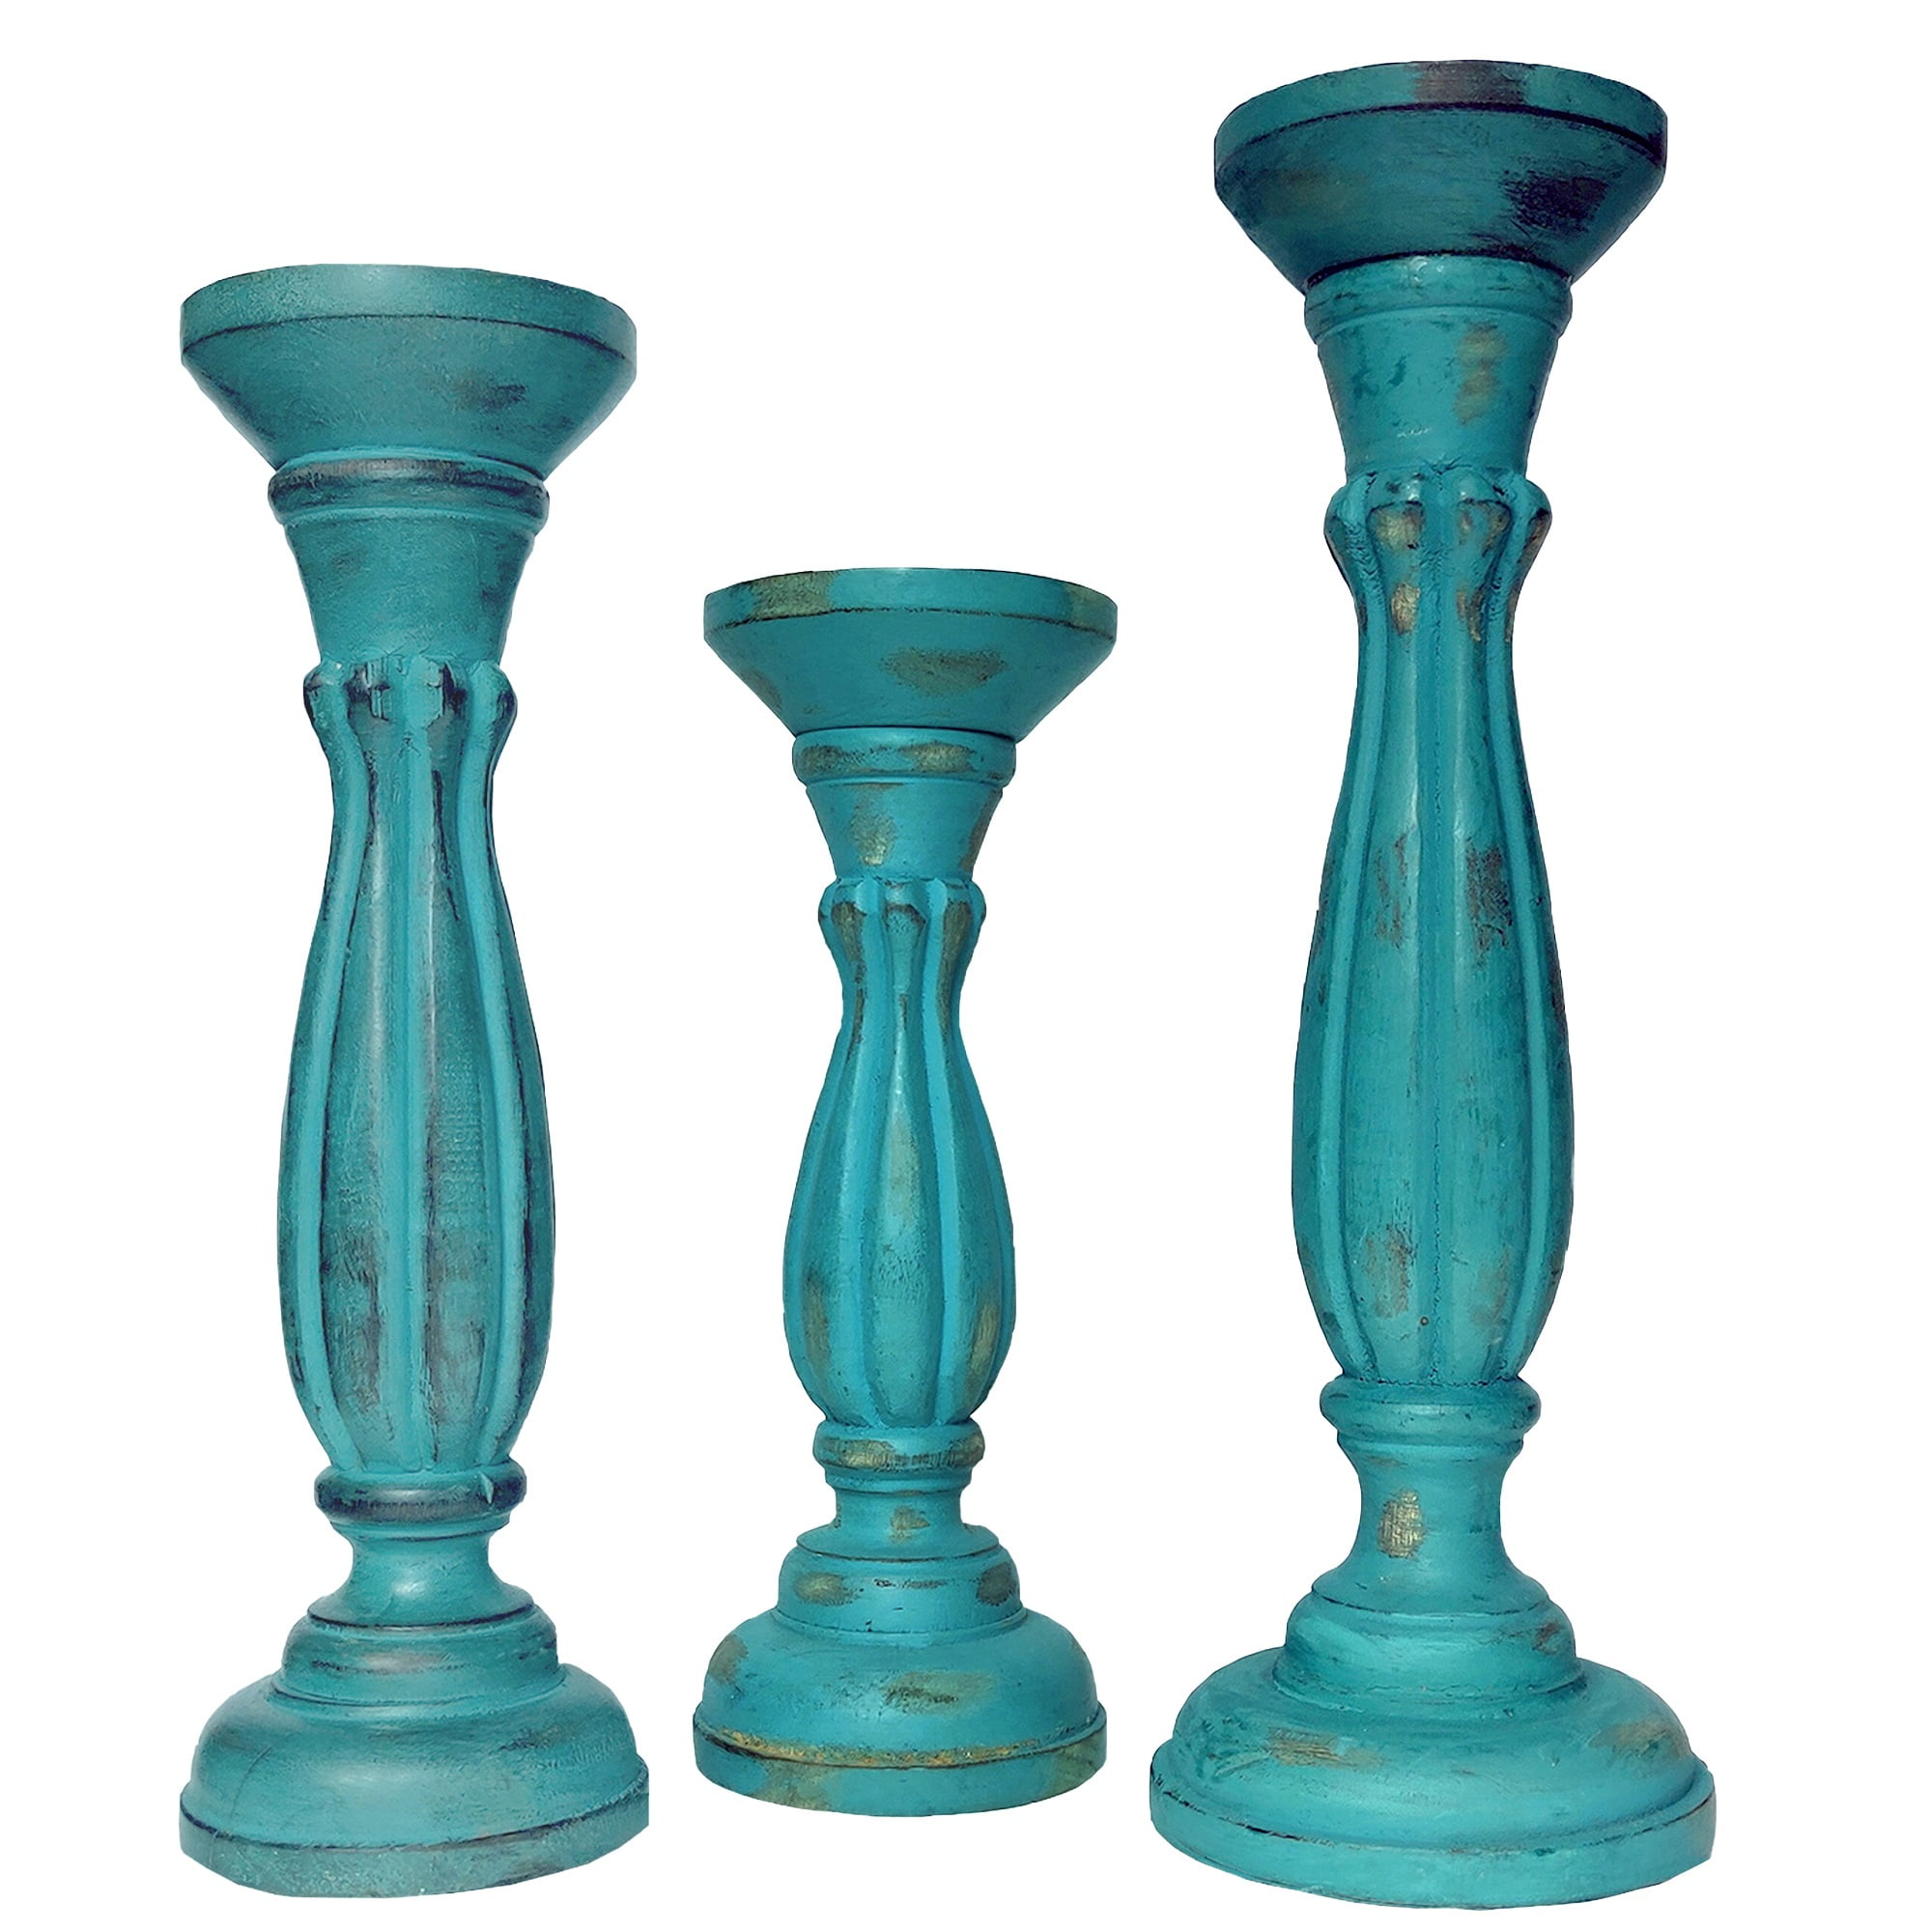 Wooden Vintage Candle Stand Turquoise Gold Candlestick for Pillar Candles 